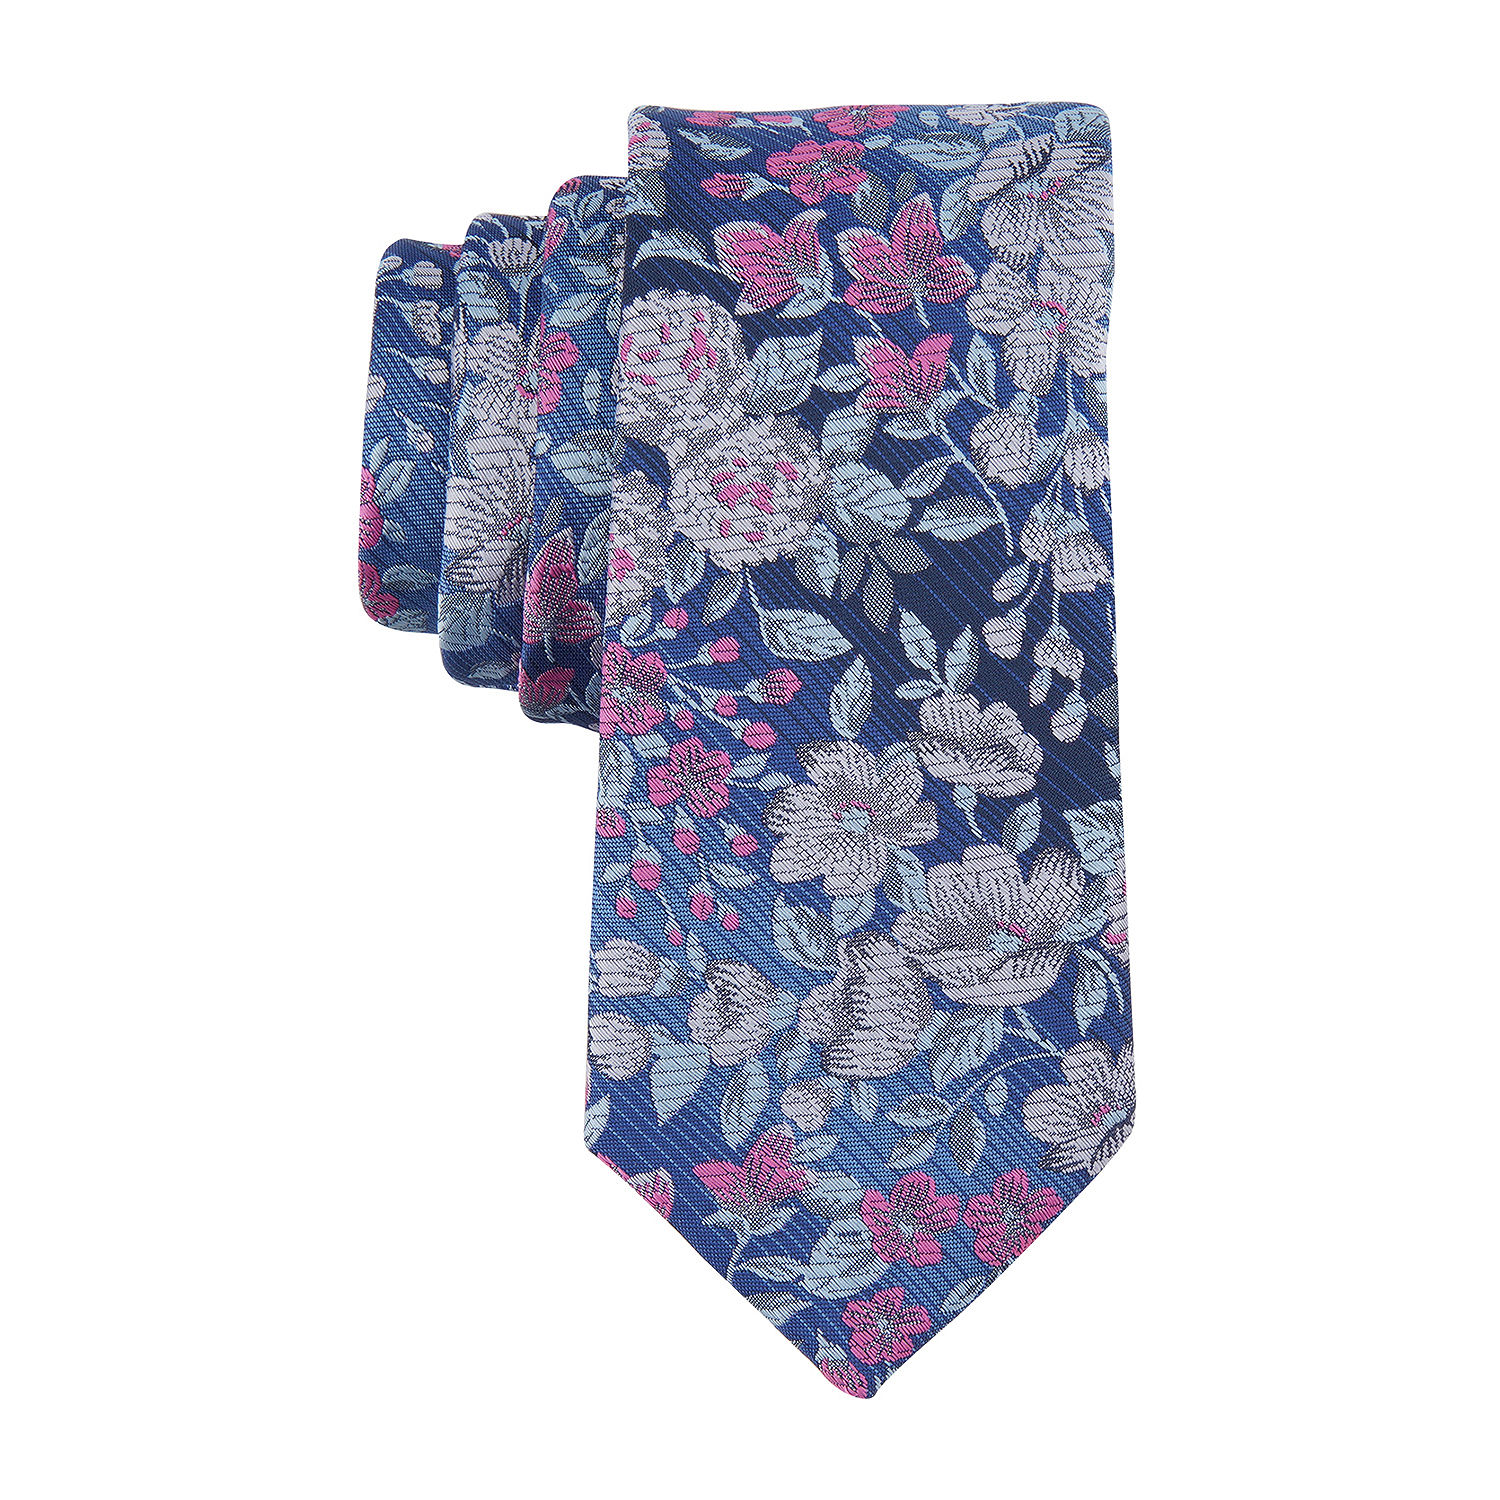 Stafford Floral Tie - JCPenney